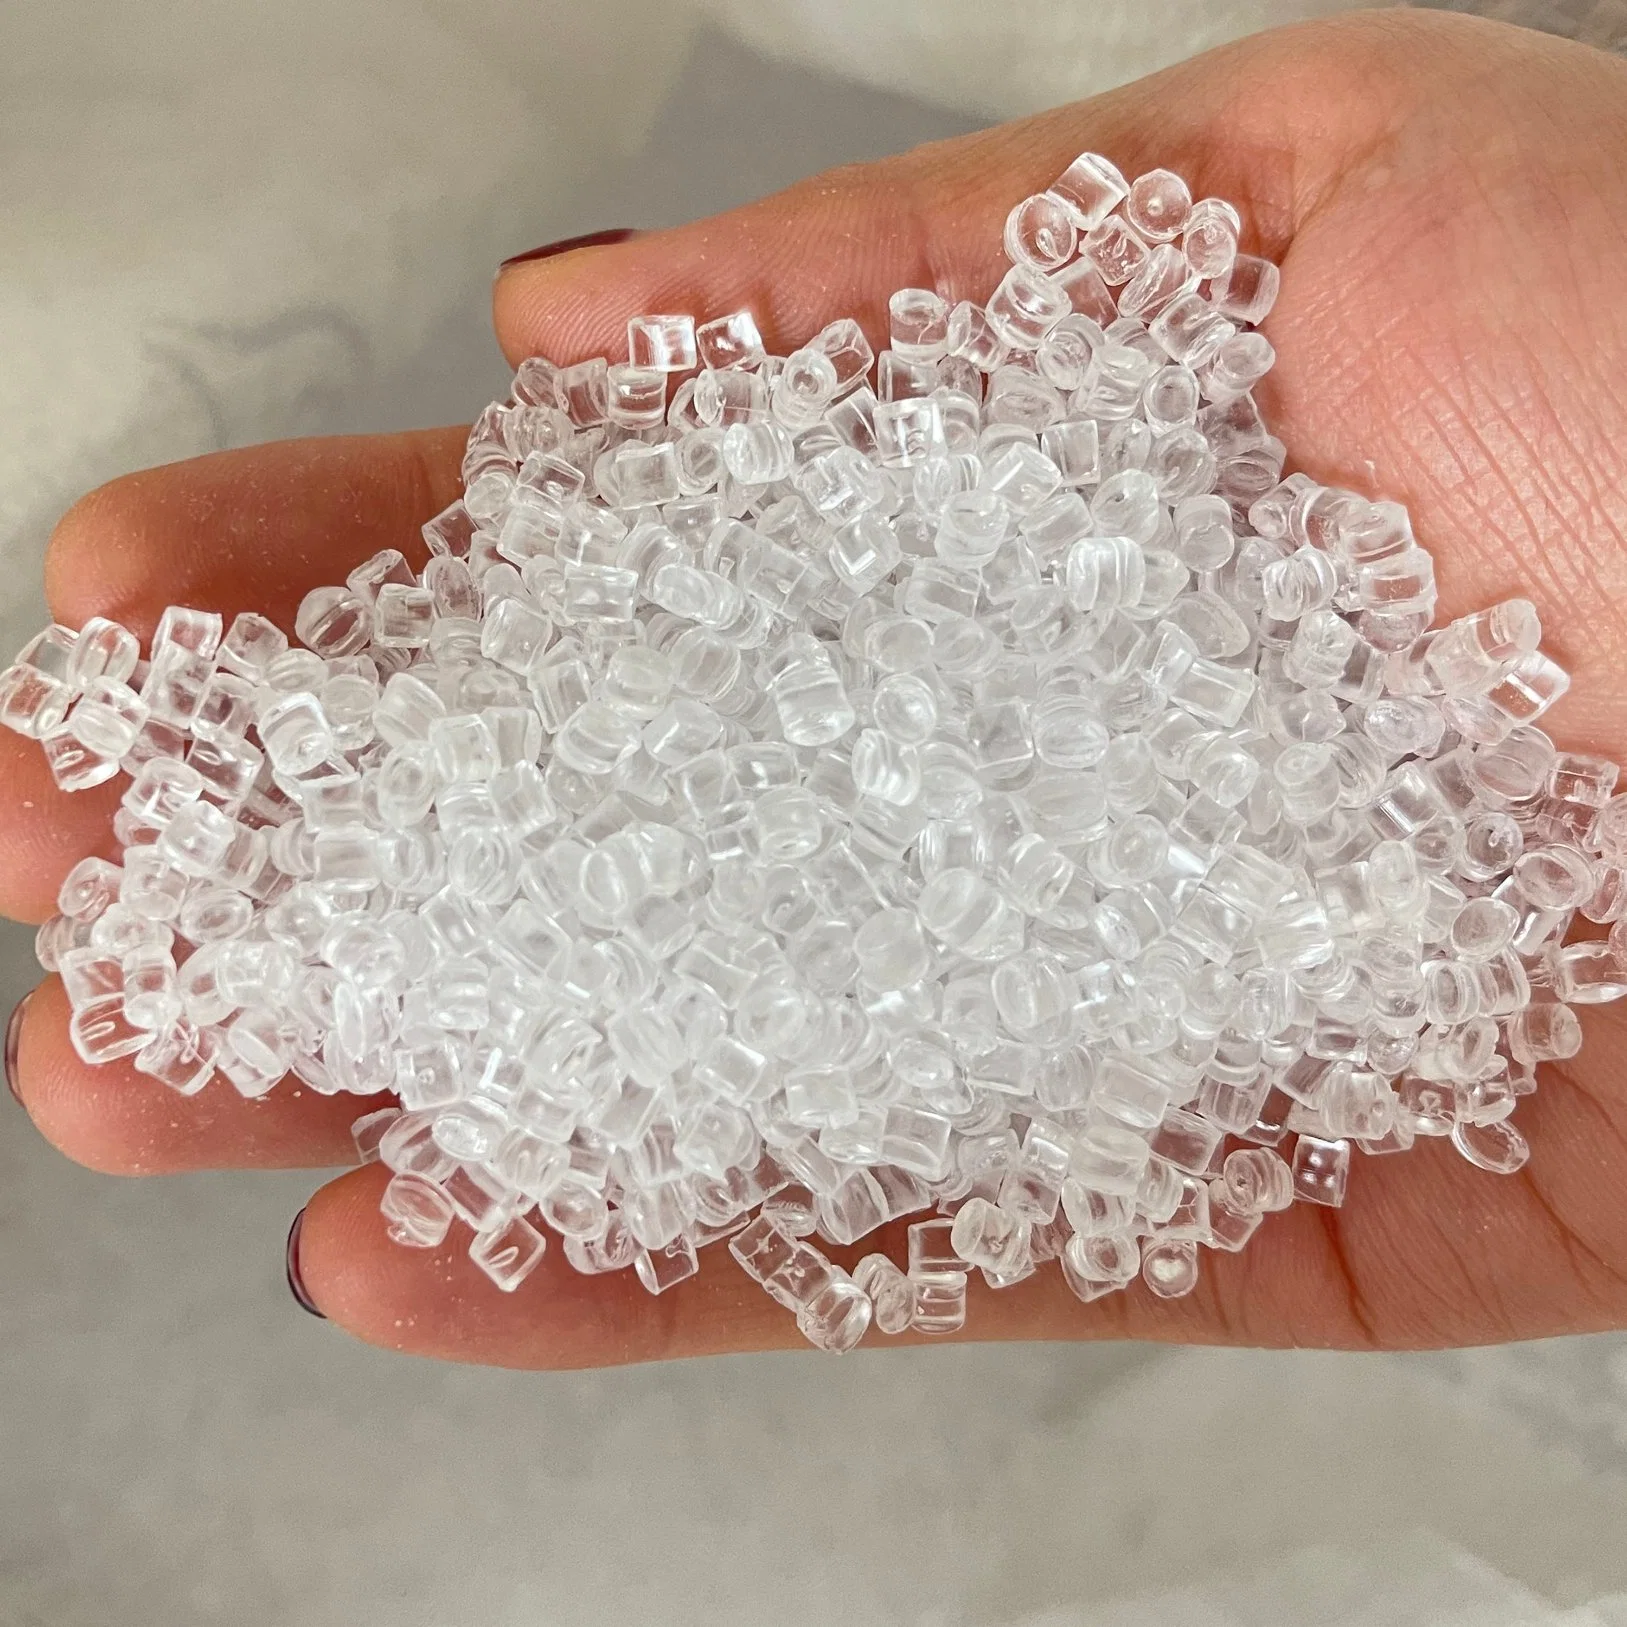 Virgin High Clarity Saudi Arabia GPPS PS125 General Purpose Polystyrene PS 125 Resin Injection Molding Grade Recycled GPPS Granules for Boxes Packaging